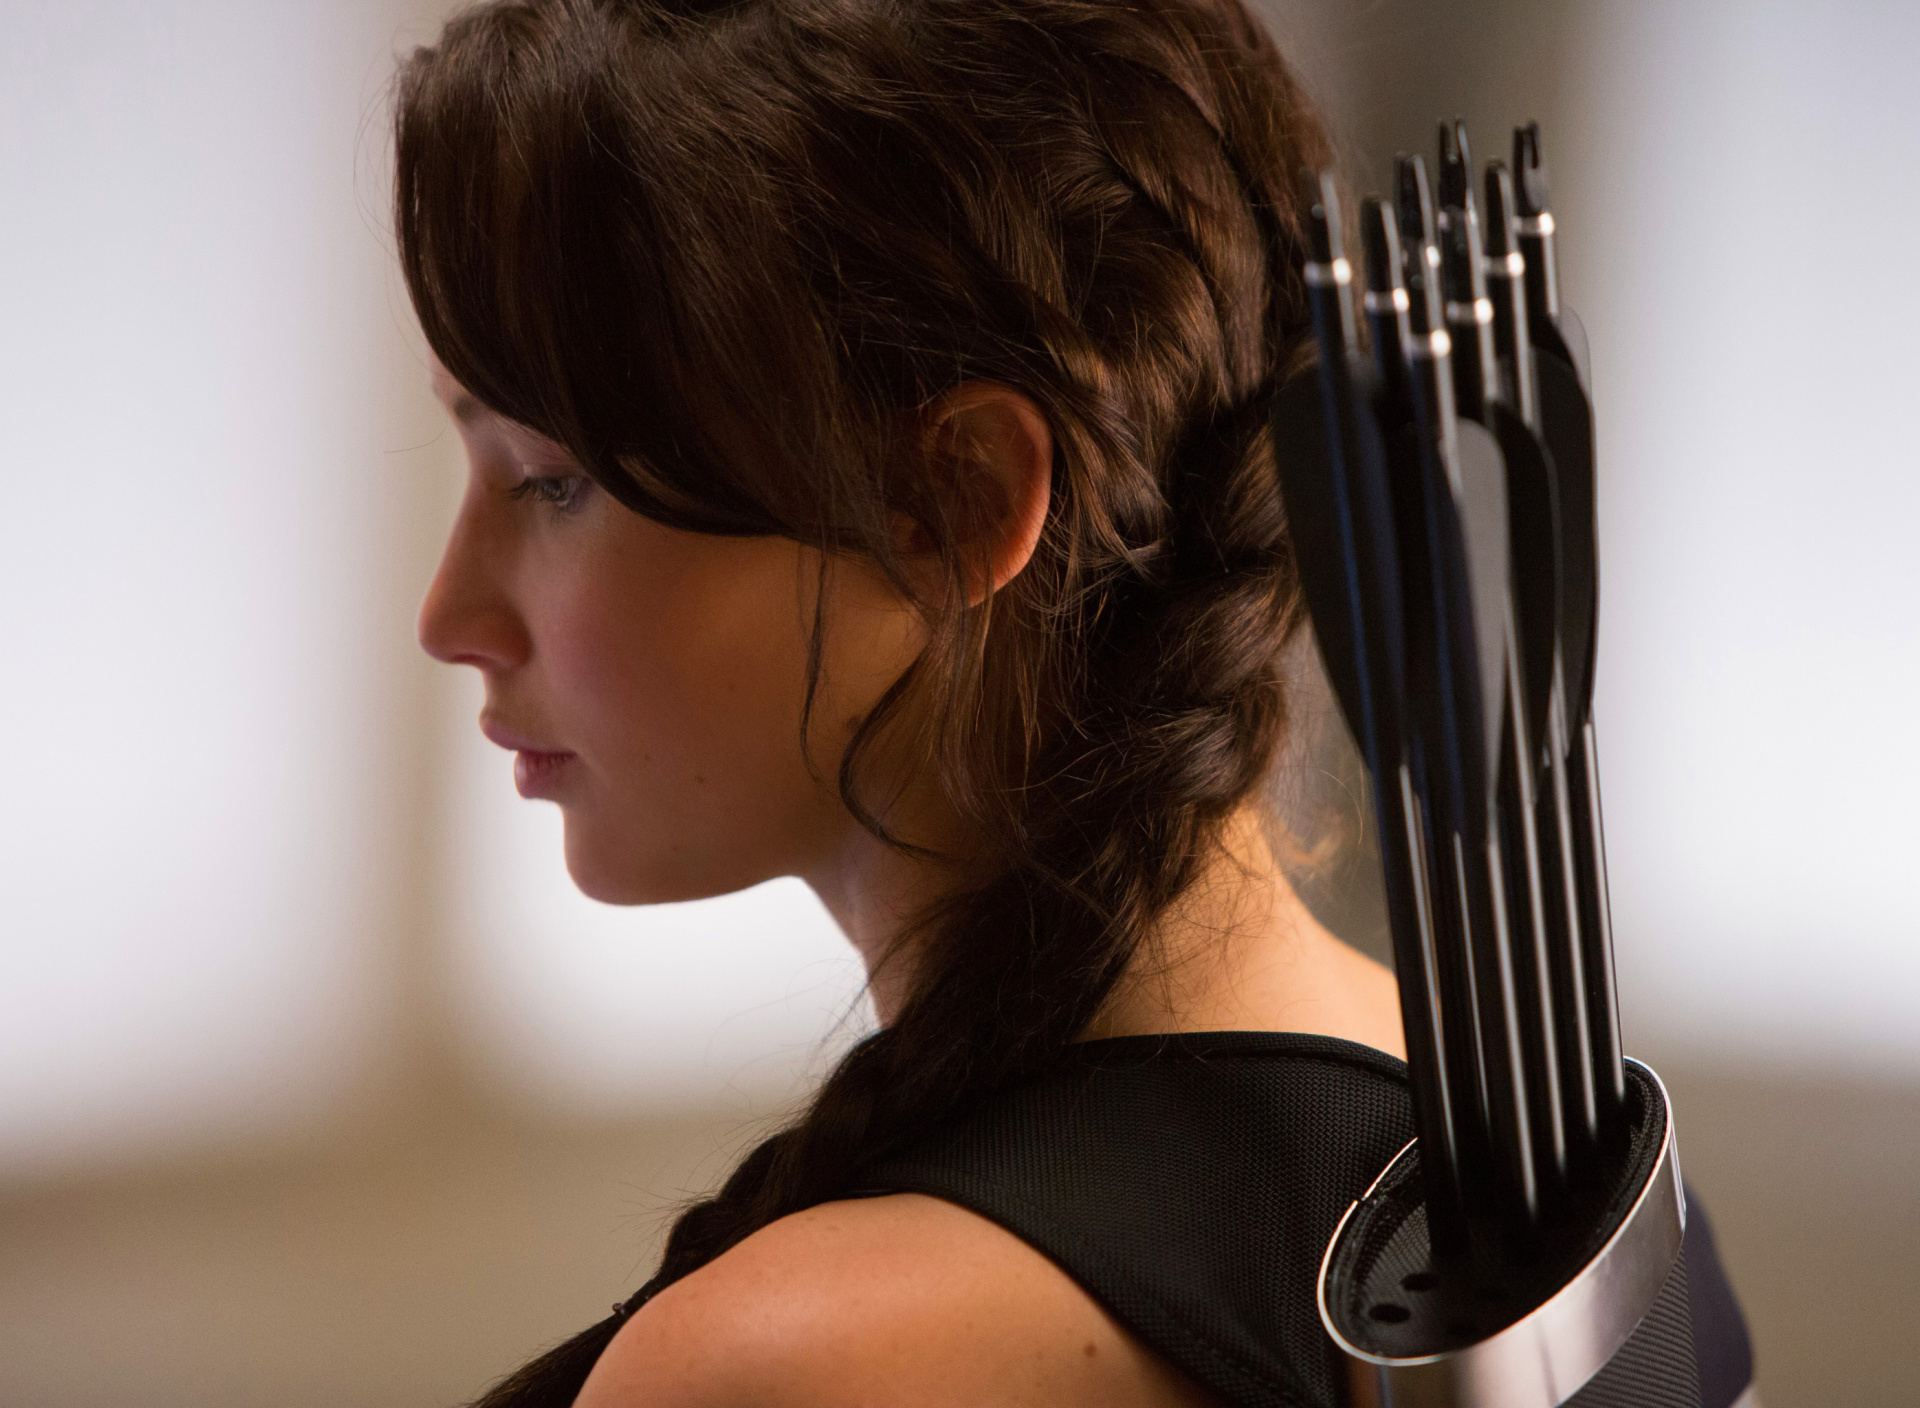 Jennifer lawrence in The Hunger Games Catching Fire screenshot #1 1920x1408